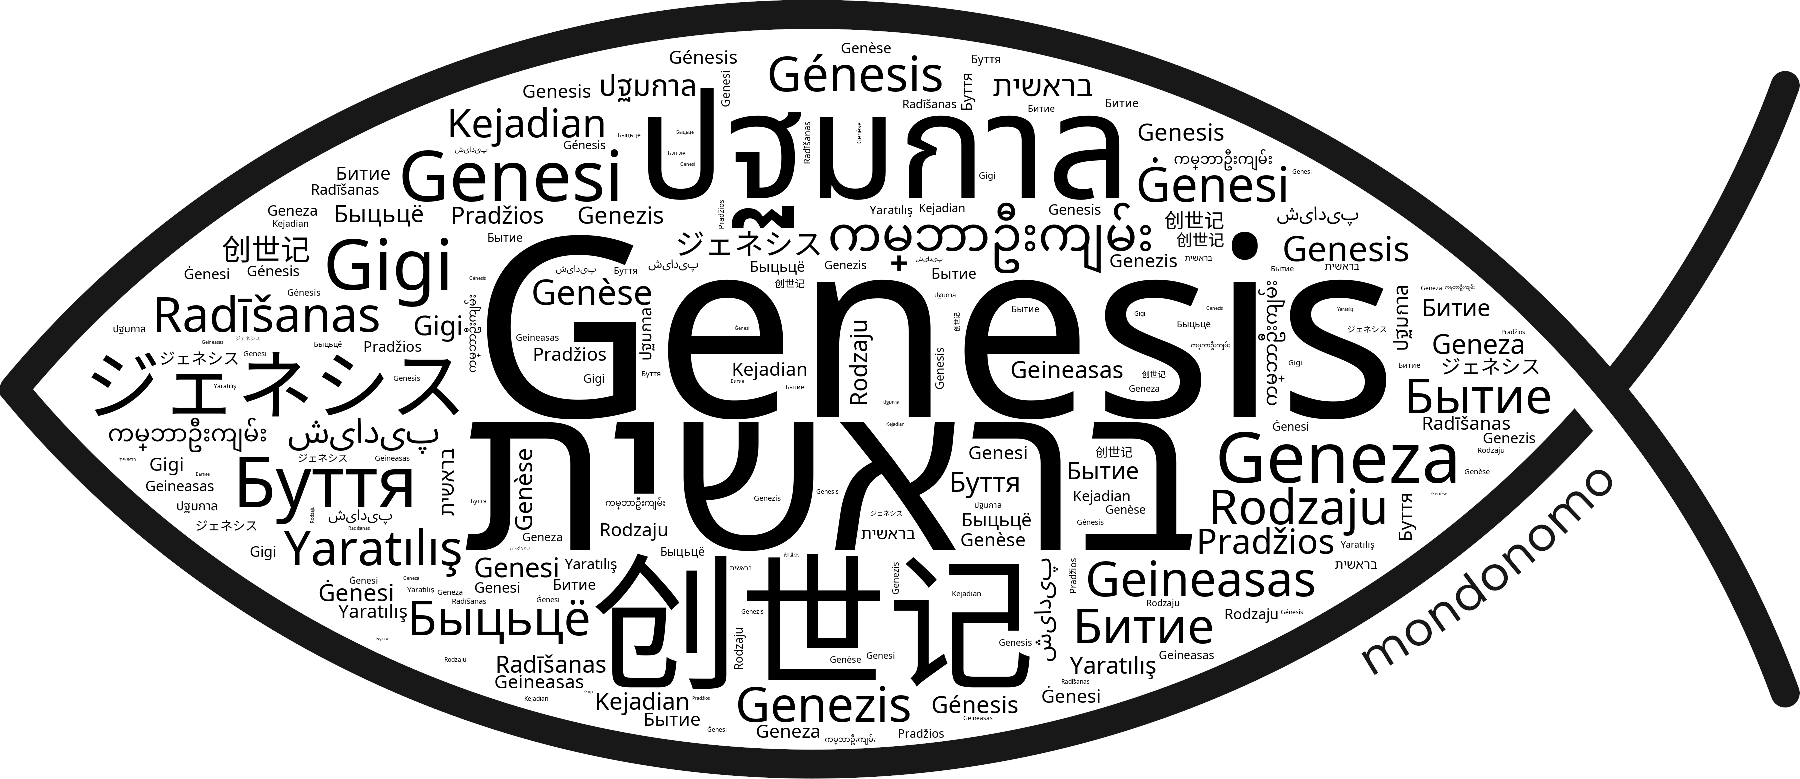 Name Genesis in the world's Bibles